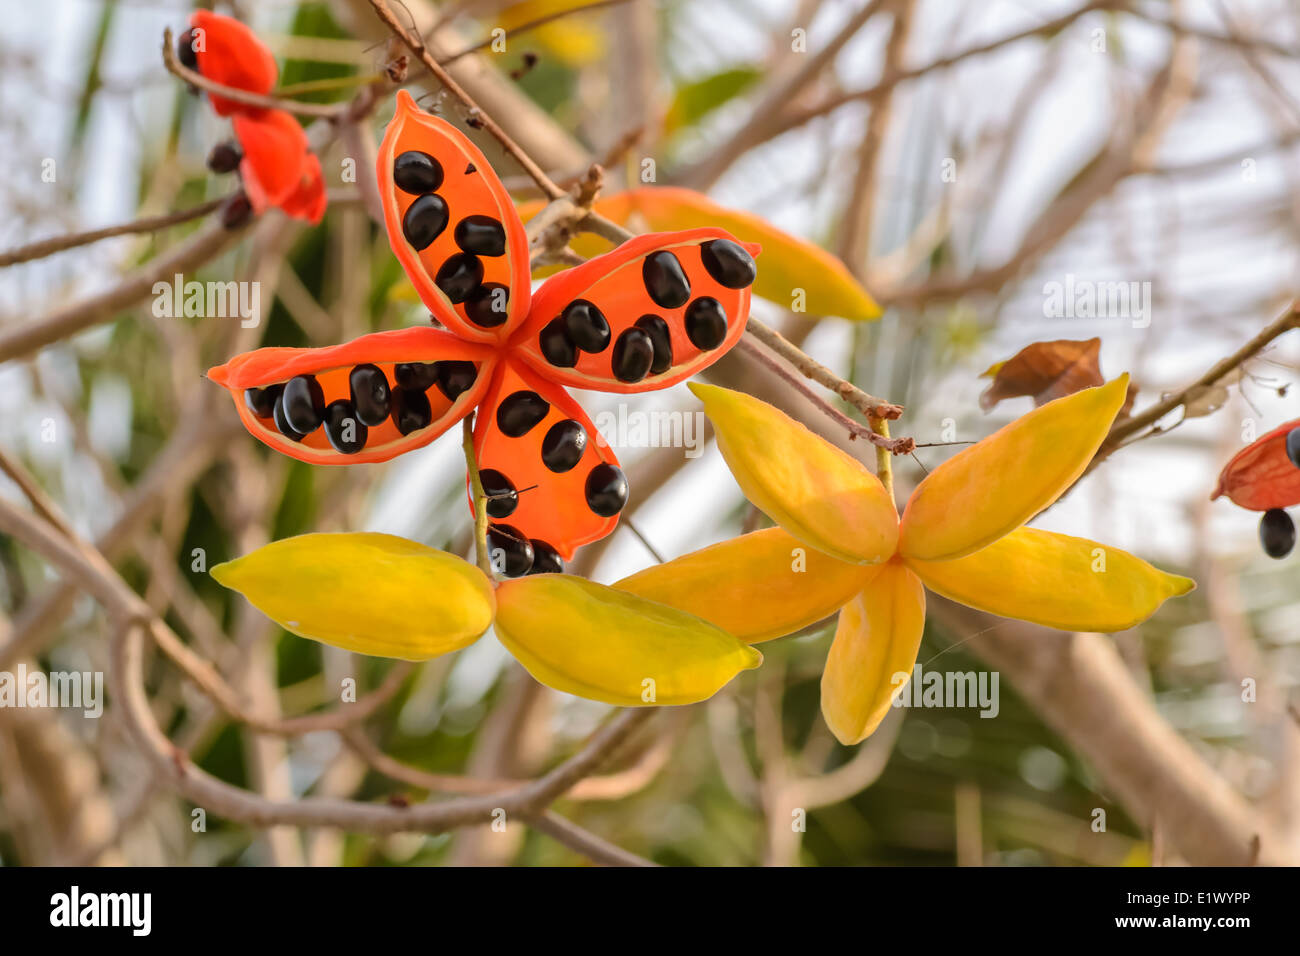 the seed of Sterculia lanceolata tree, it is a tropical plant growth in South Asia. Stock Photo